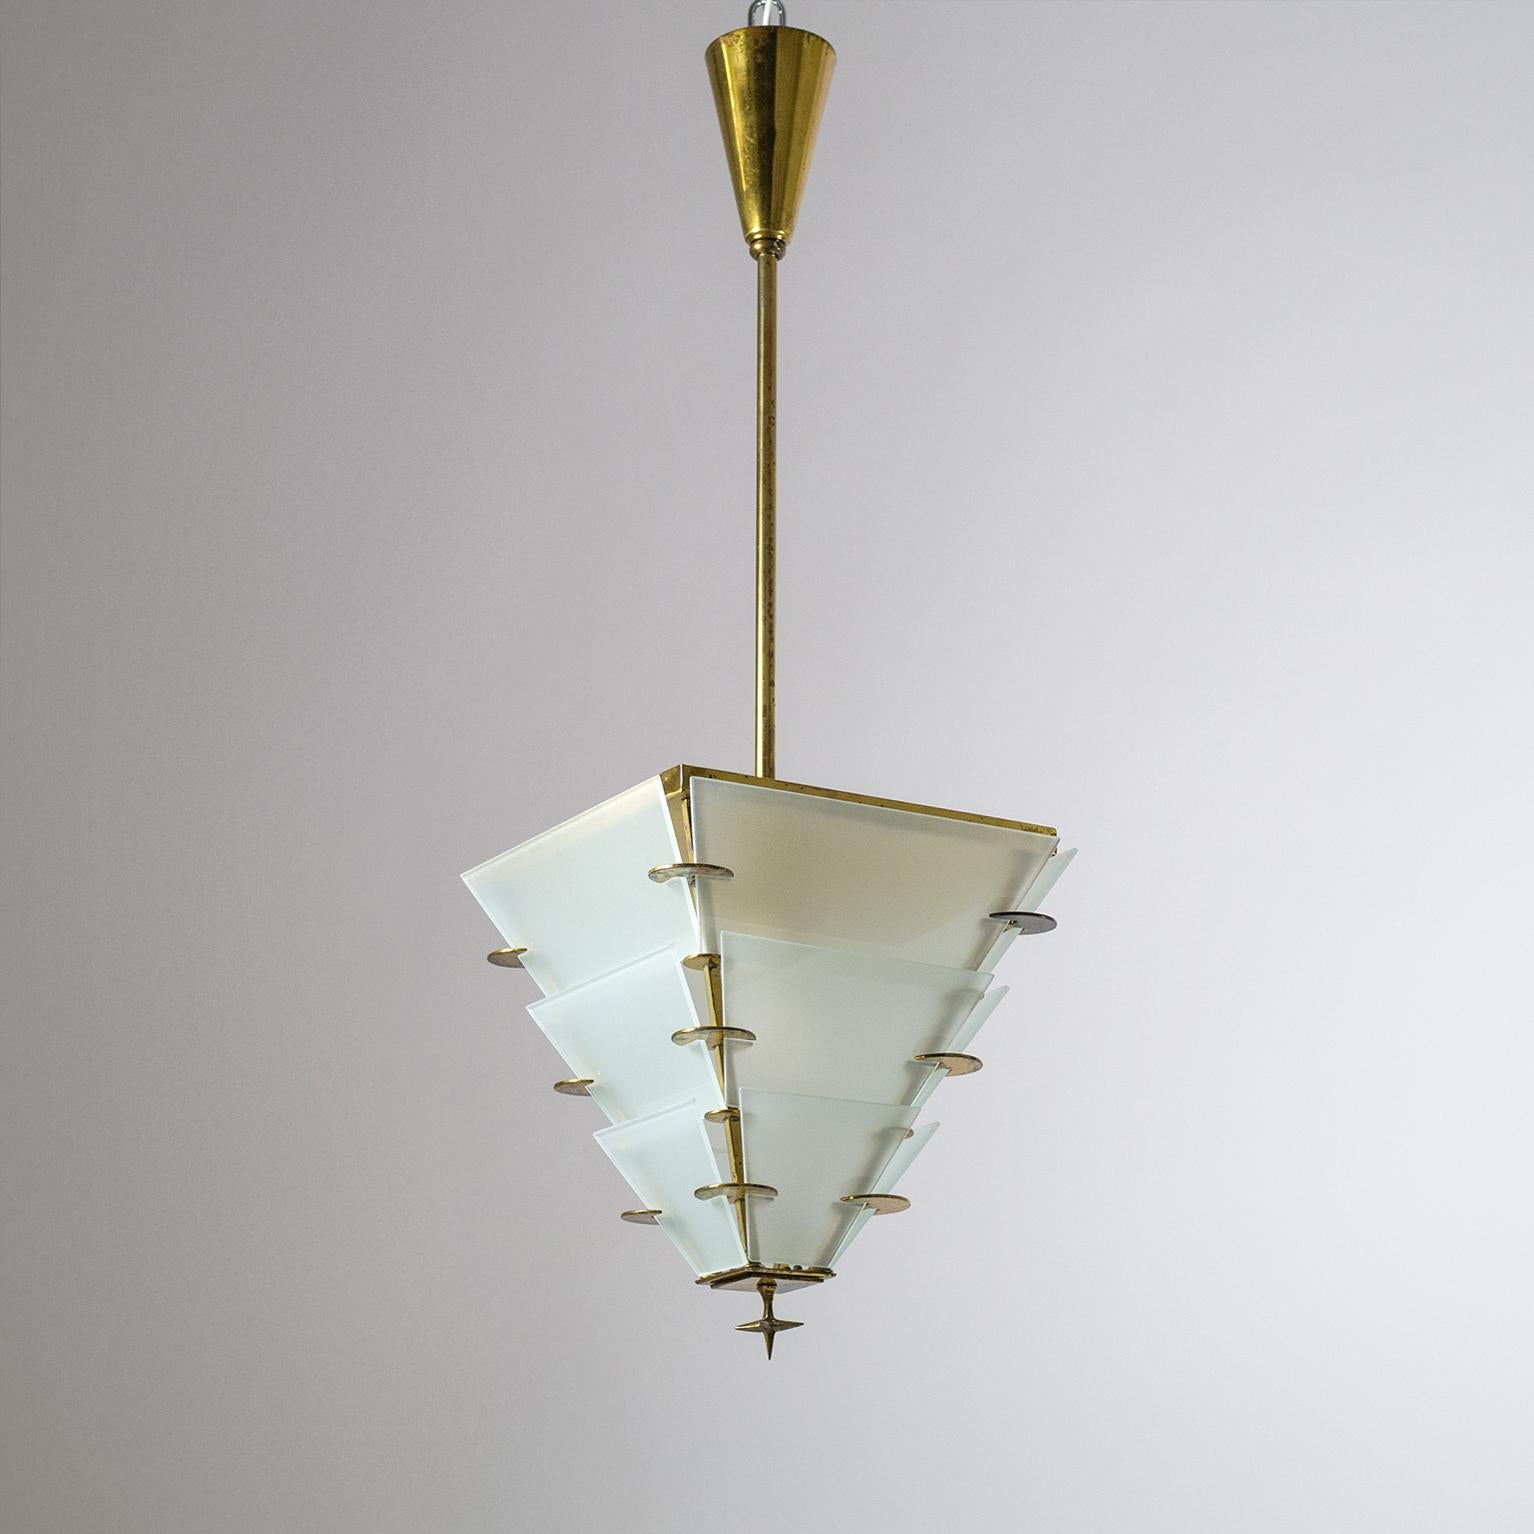 Very fine Art Deco lantern in brass with tiered satinated glass elements. The inverted pyramid shaped lantern culminates in a star-shaped brass finial. There is a good amount of age-related patina throughout on the brass. One original brass and